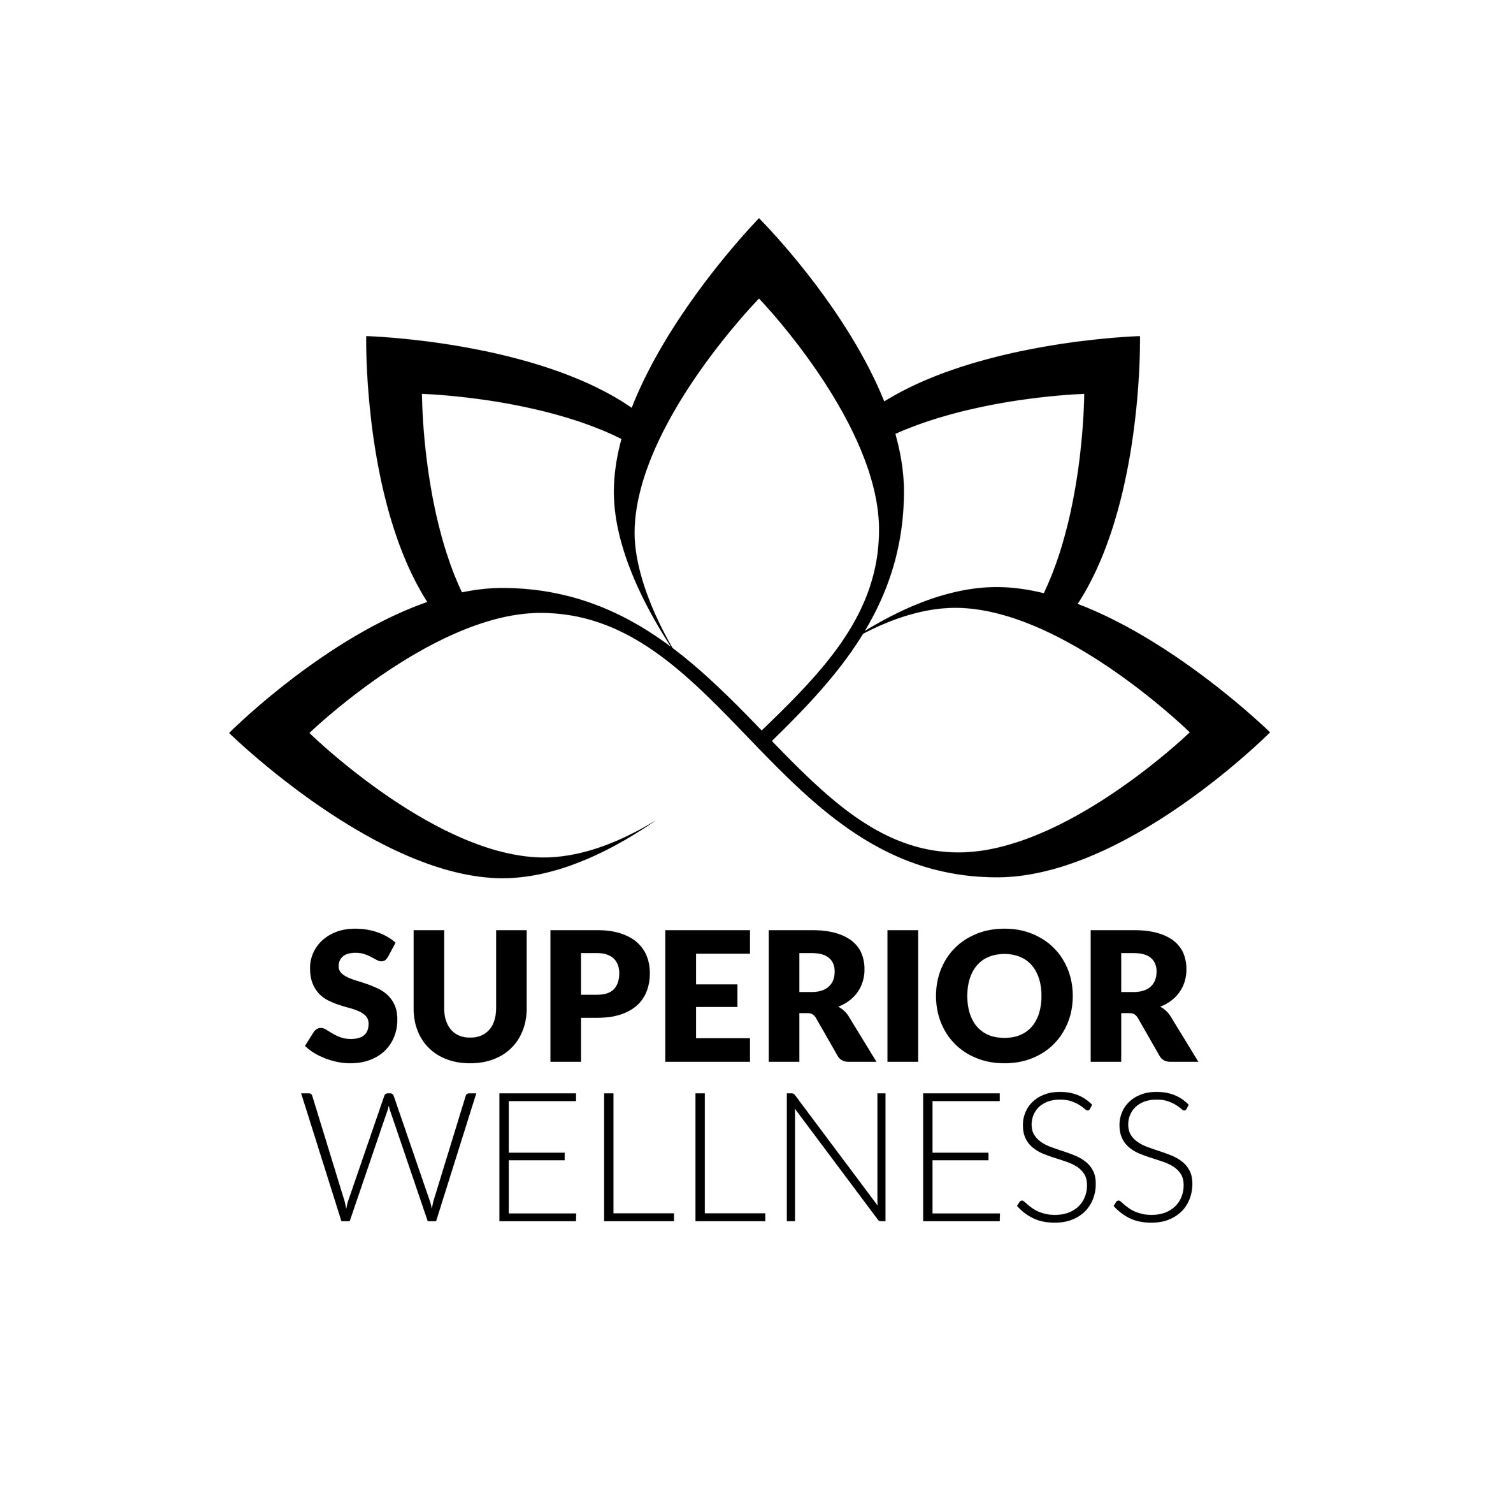 Superior Wellness listed as one of Europe’s fastest growing companies for the second year running